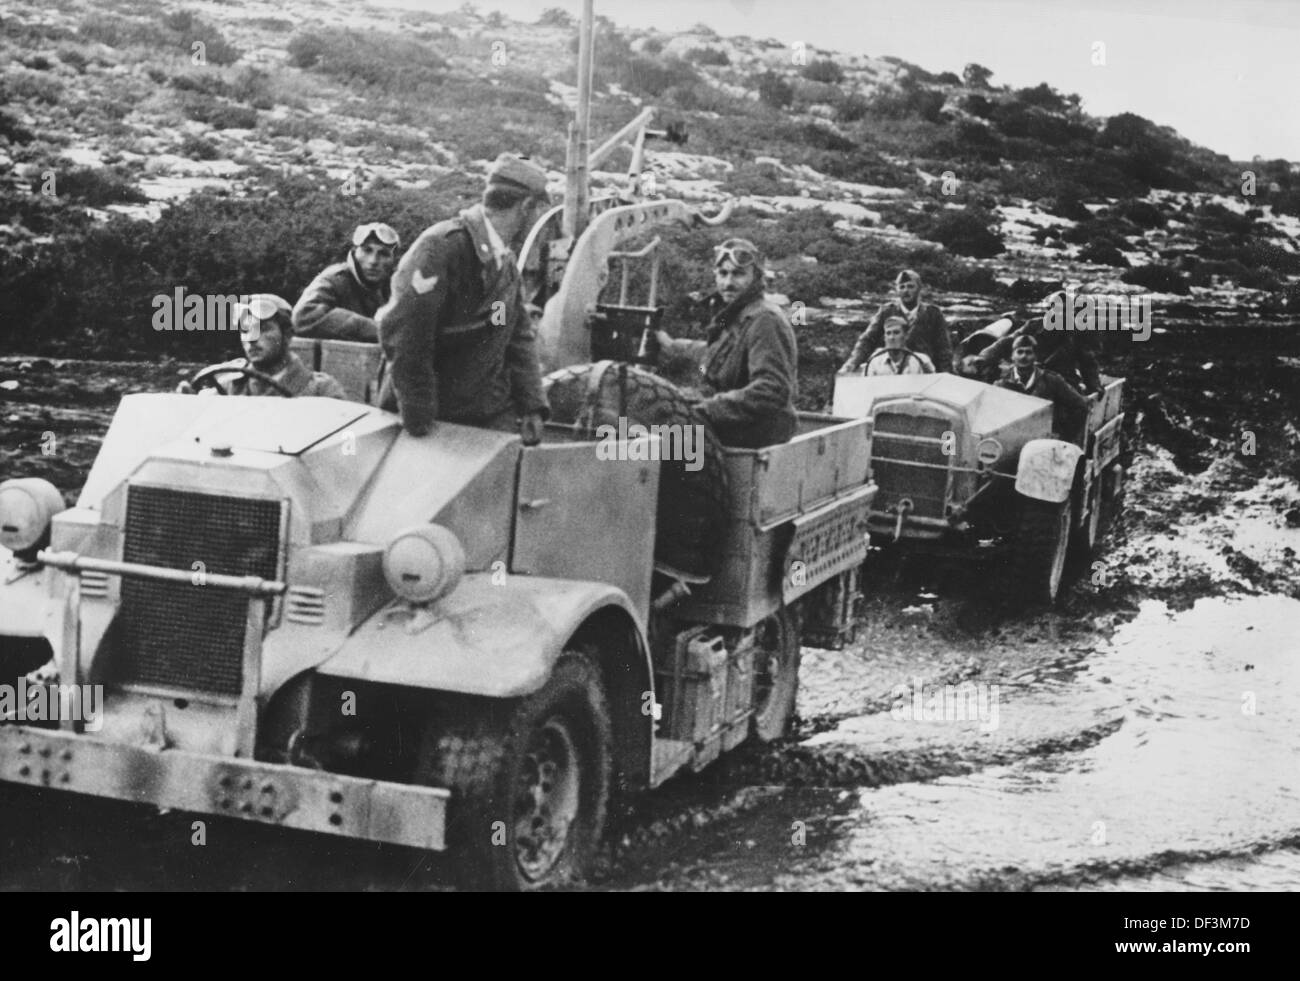 The image from the Nazi Propaganda! depicts soldiers of the Italian artillery driving through Cyrenaica in Libya, published 29 January 1941. Place unknown. Fotoarchiv für Zeitgeschichte Stock Photo